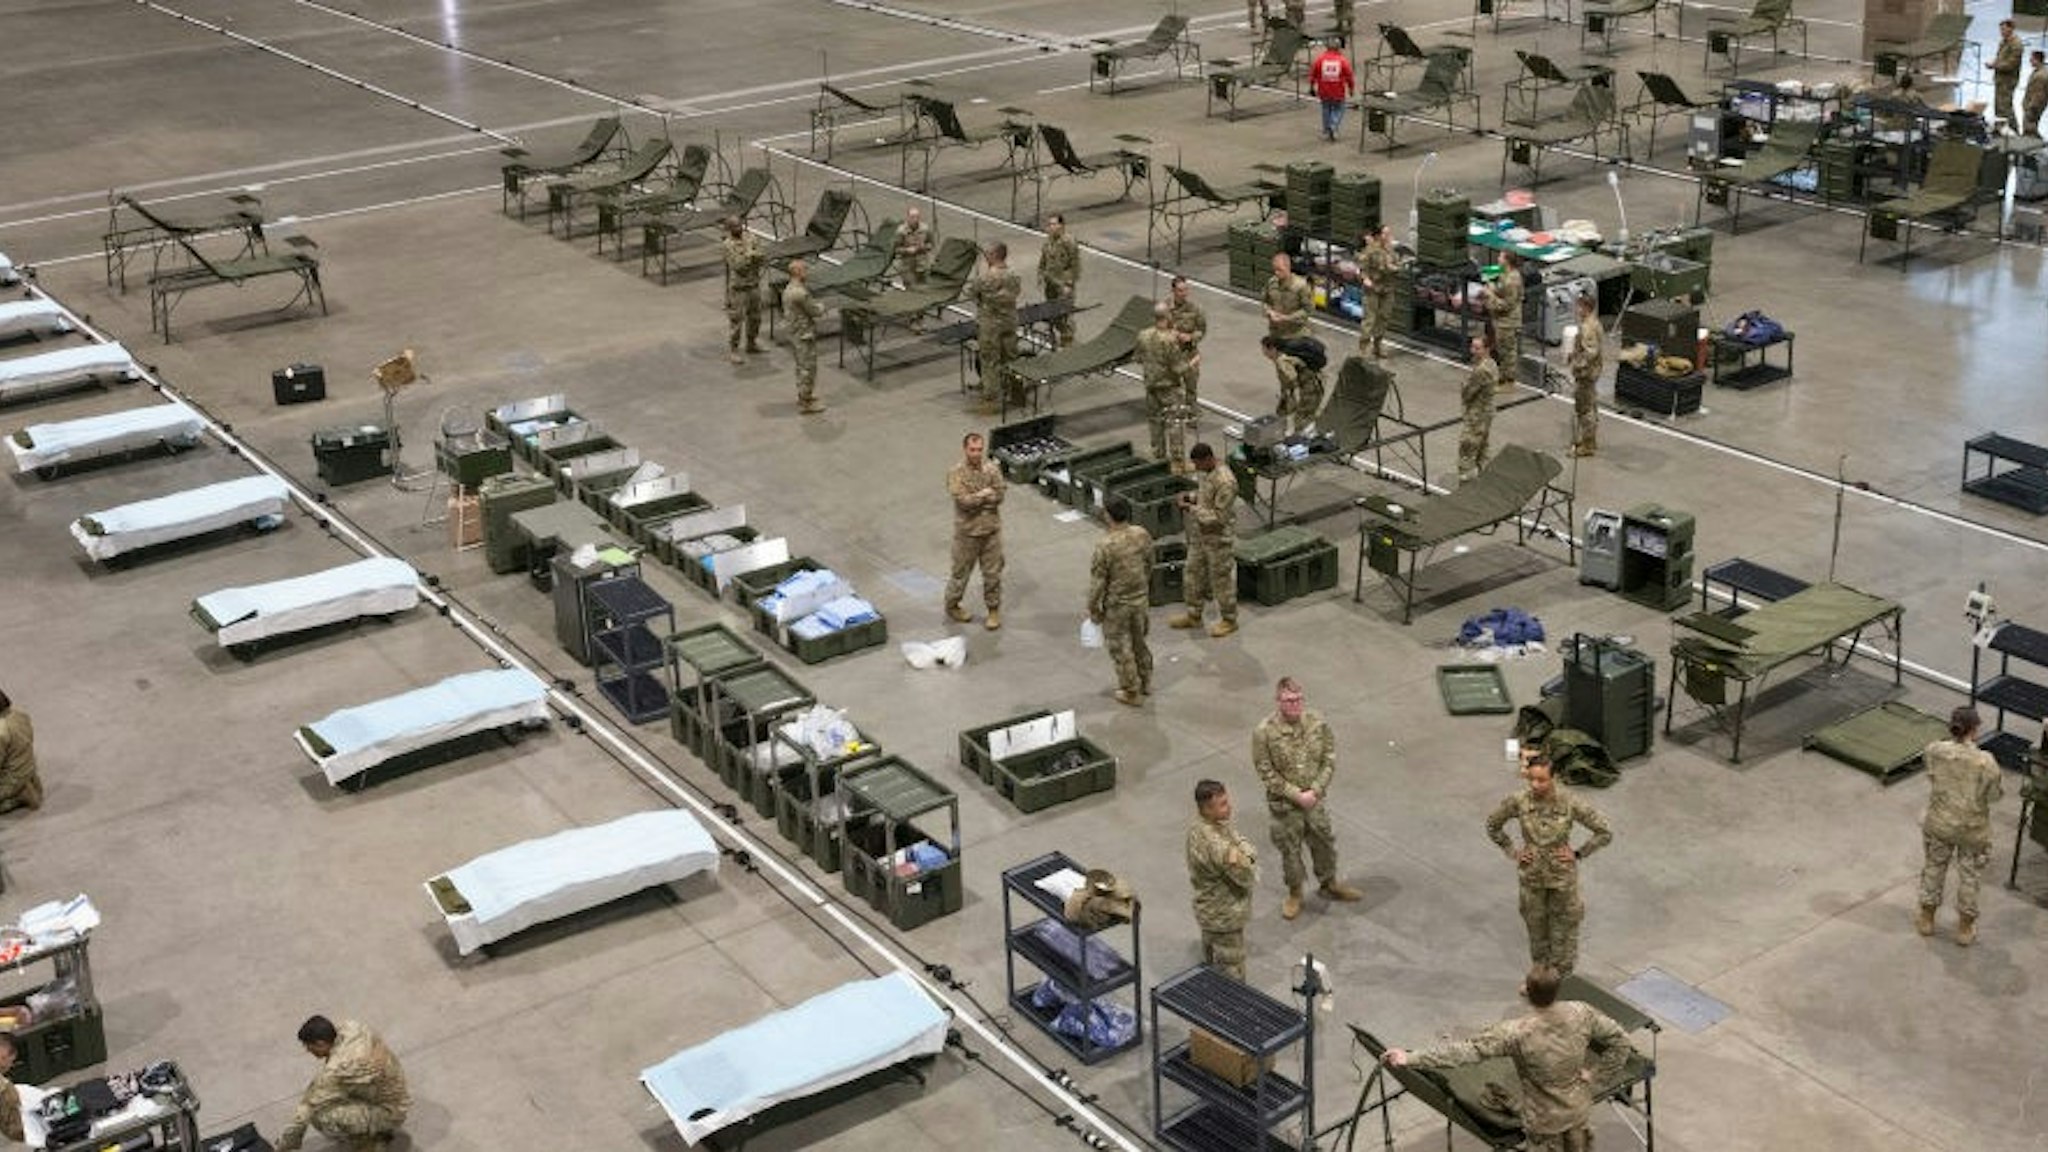 Military personnel set up the 627th Hospital Center field hospital at CenturyLink Event Center on March 31, 2020 in Seattle, Washington. 250 beds, including 148 from Fort Carson, Colorado, and other personnel from Joint Base Lewis-McChord, will be ready for non-COVID-19 patients sometime next week. When done it will have the capability of a normal hospital including an operating room, intensive care units, X-rays and more. (Photo by